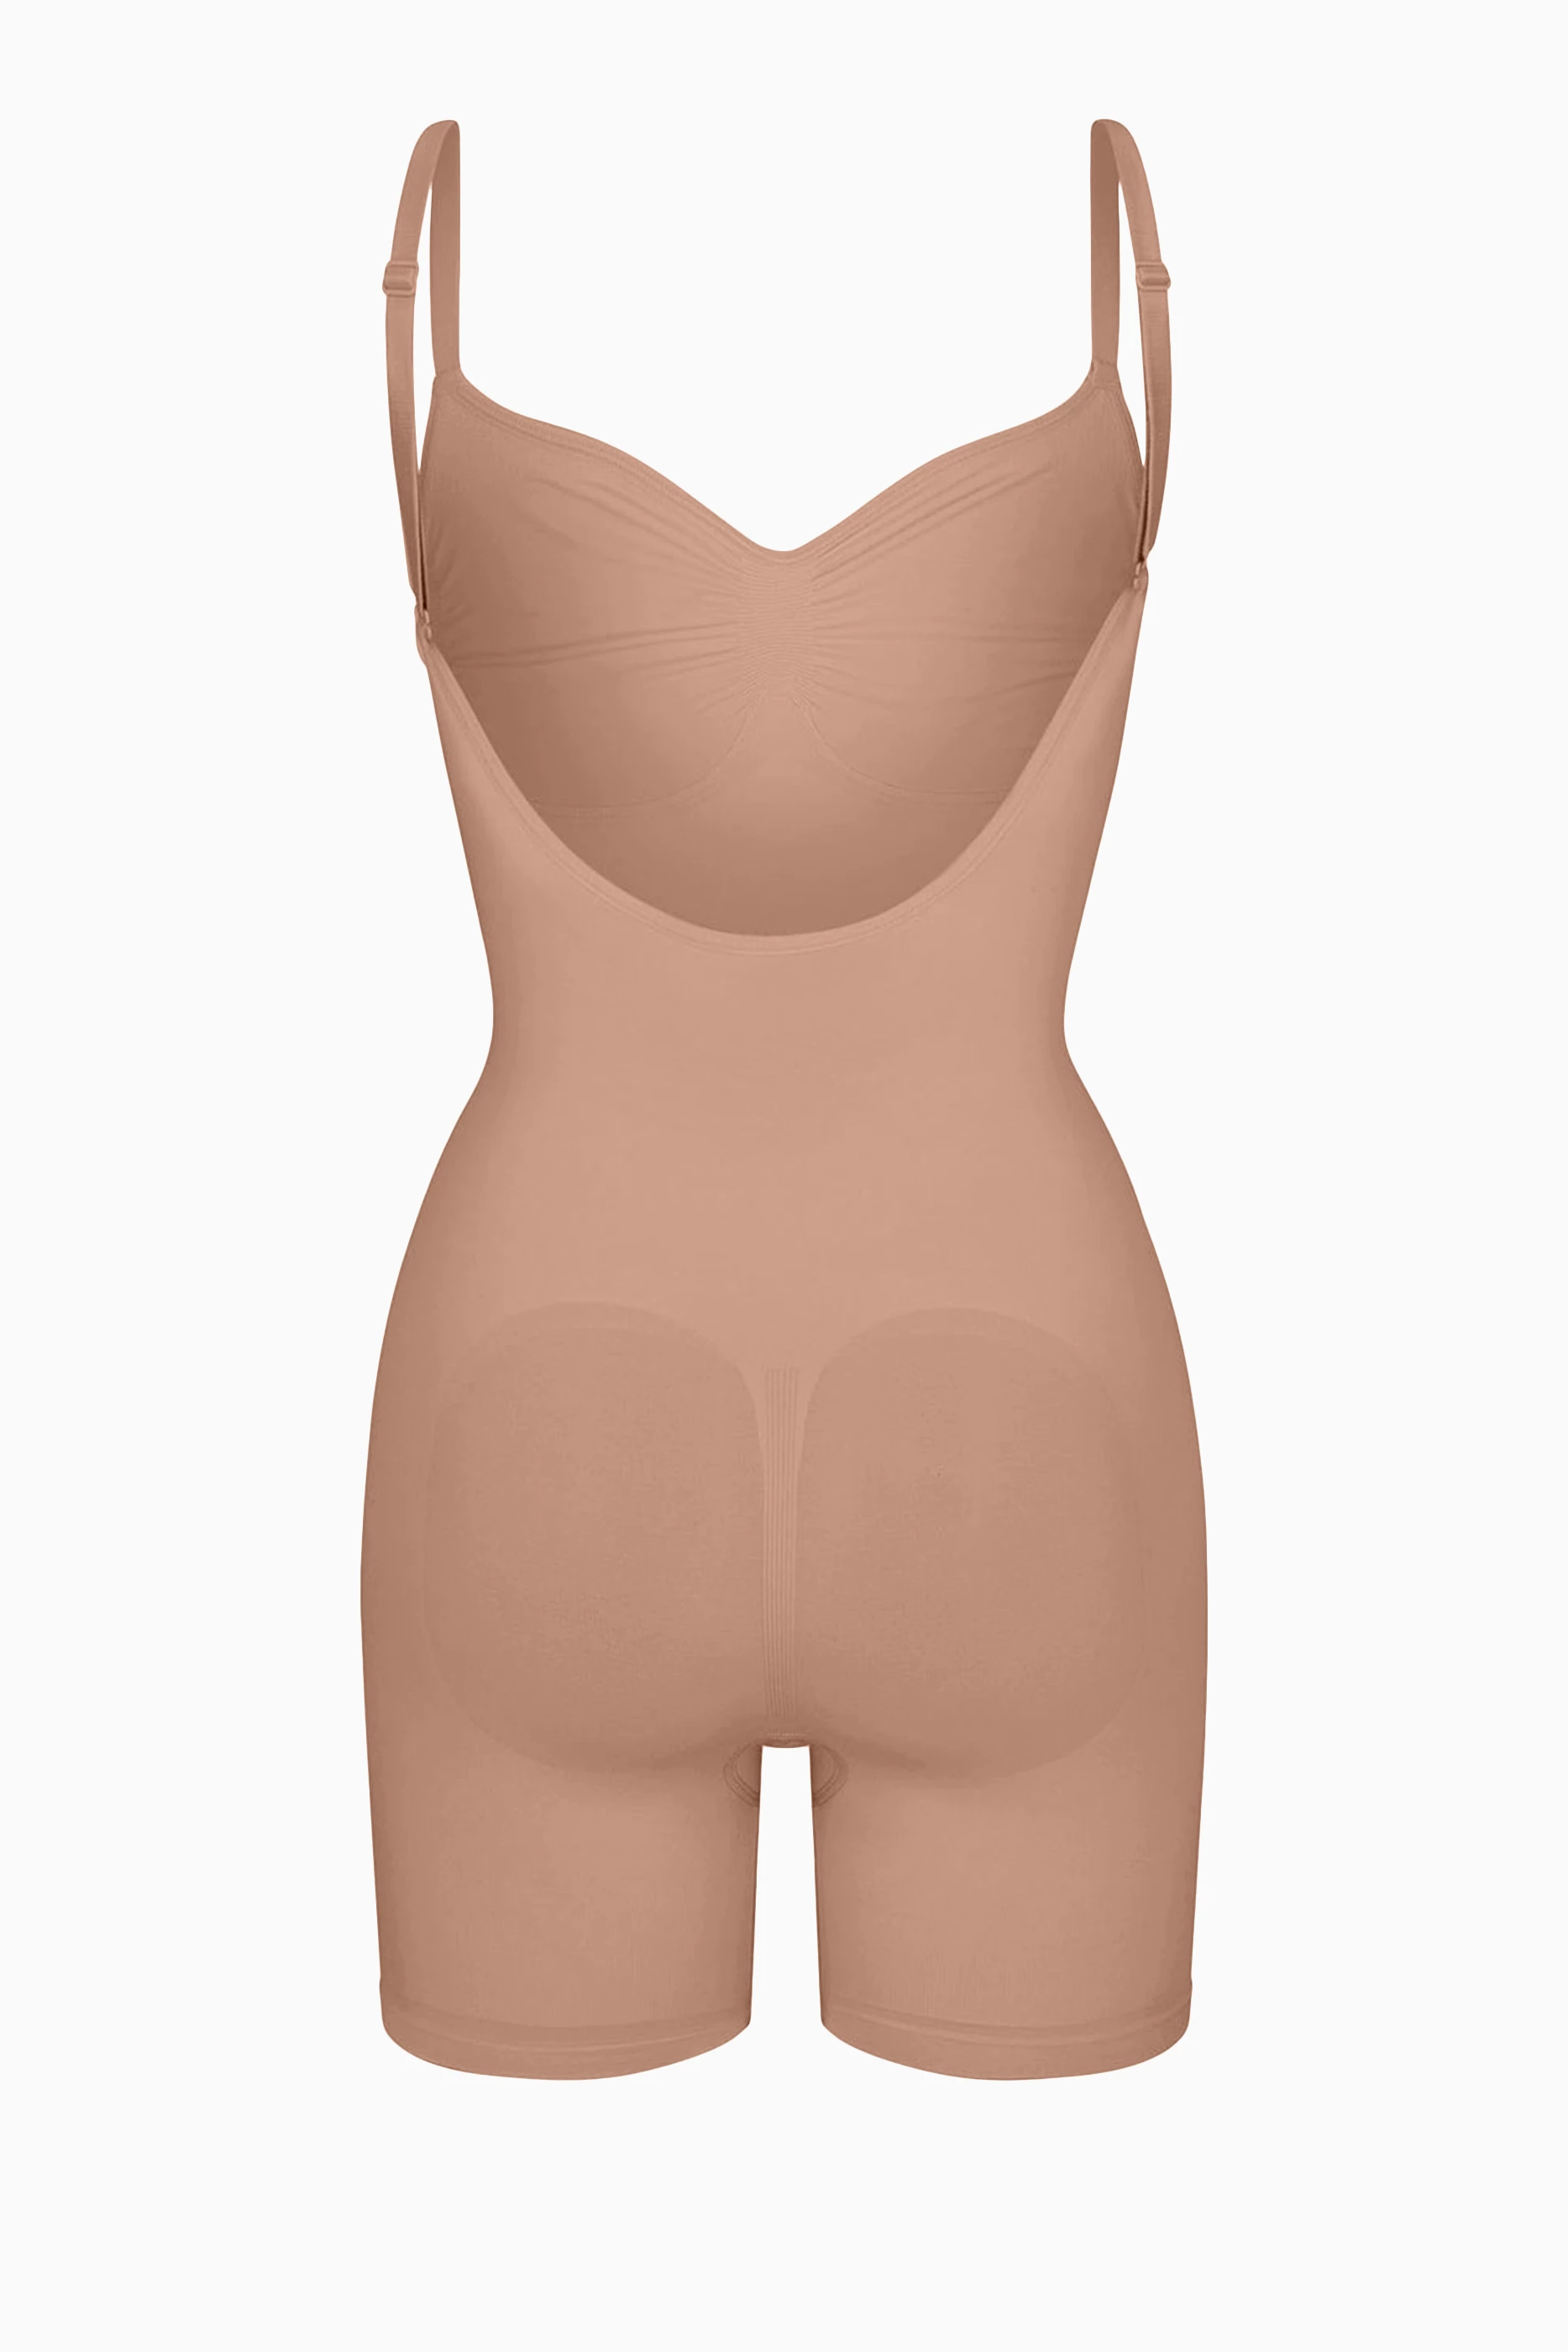 Womens Skims brown Seamless Sculpt Thong Bodysuit | Harrods # {CountryCode}